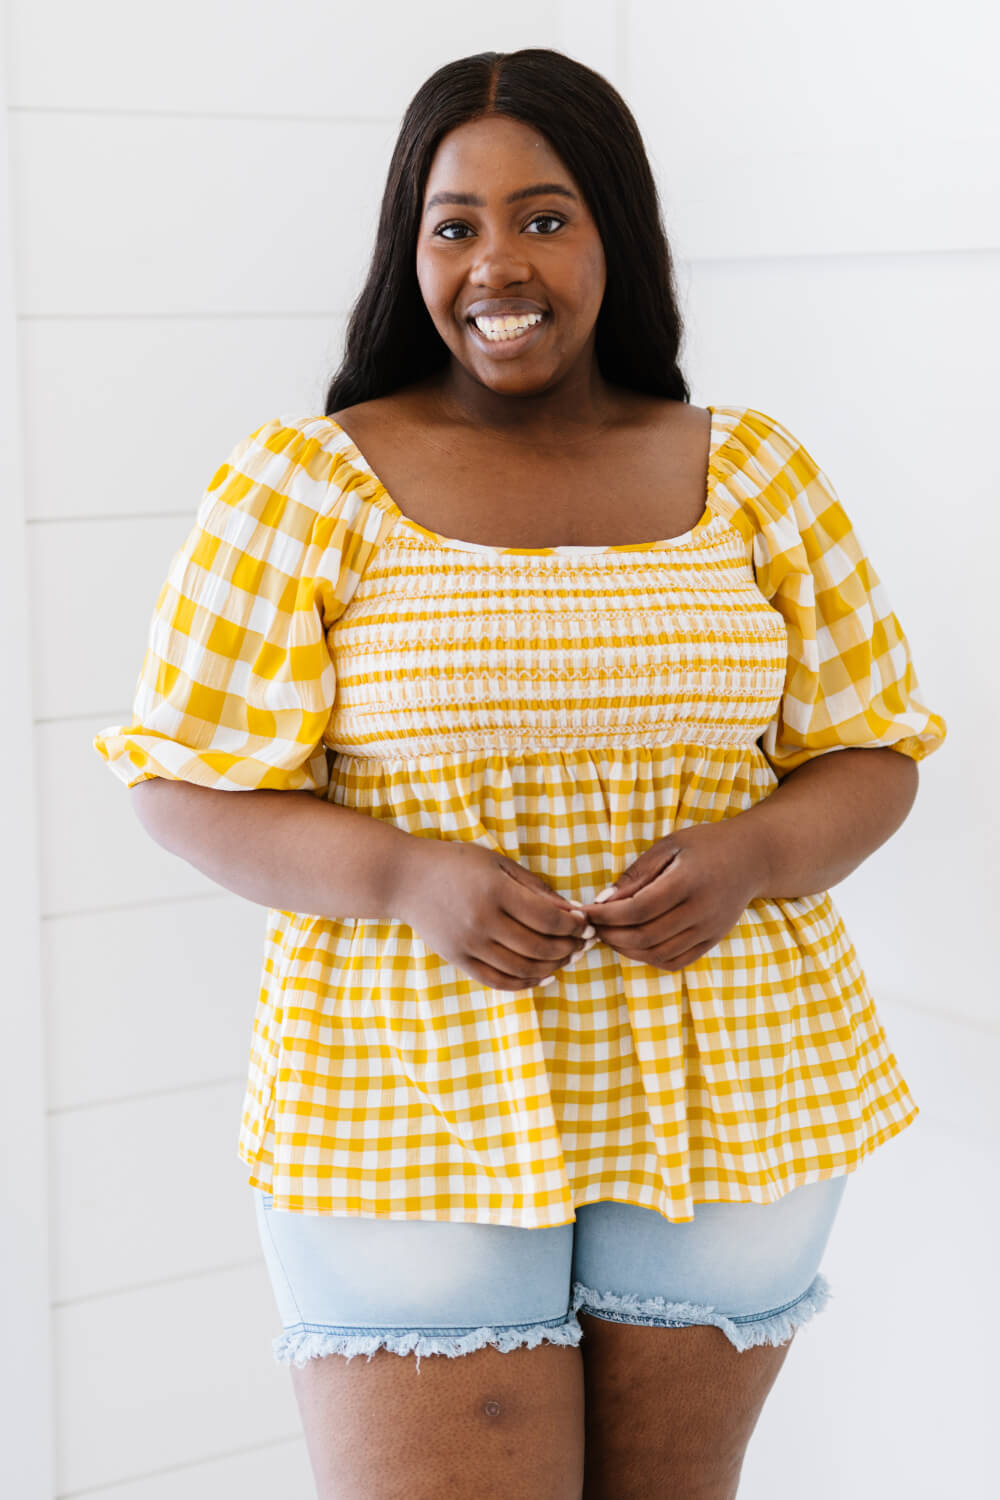 Fun At The Park Gingham Babydoll Top in Mustard